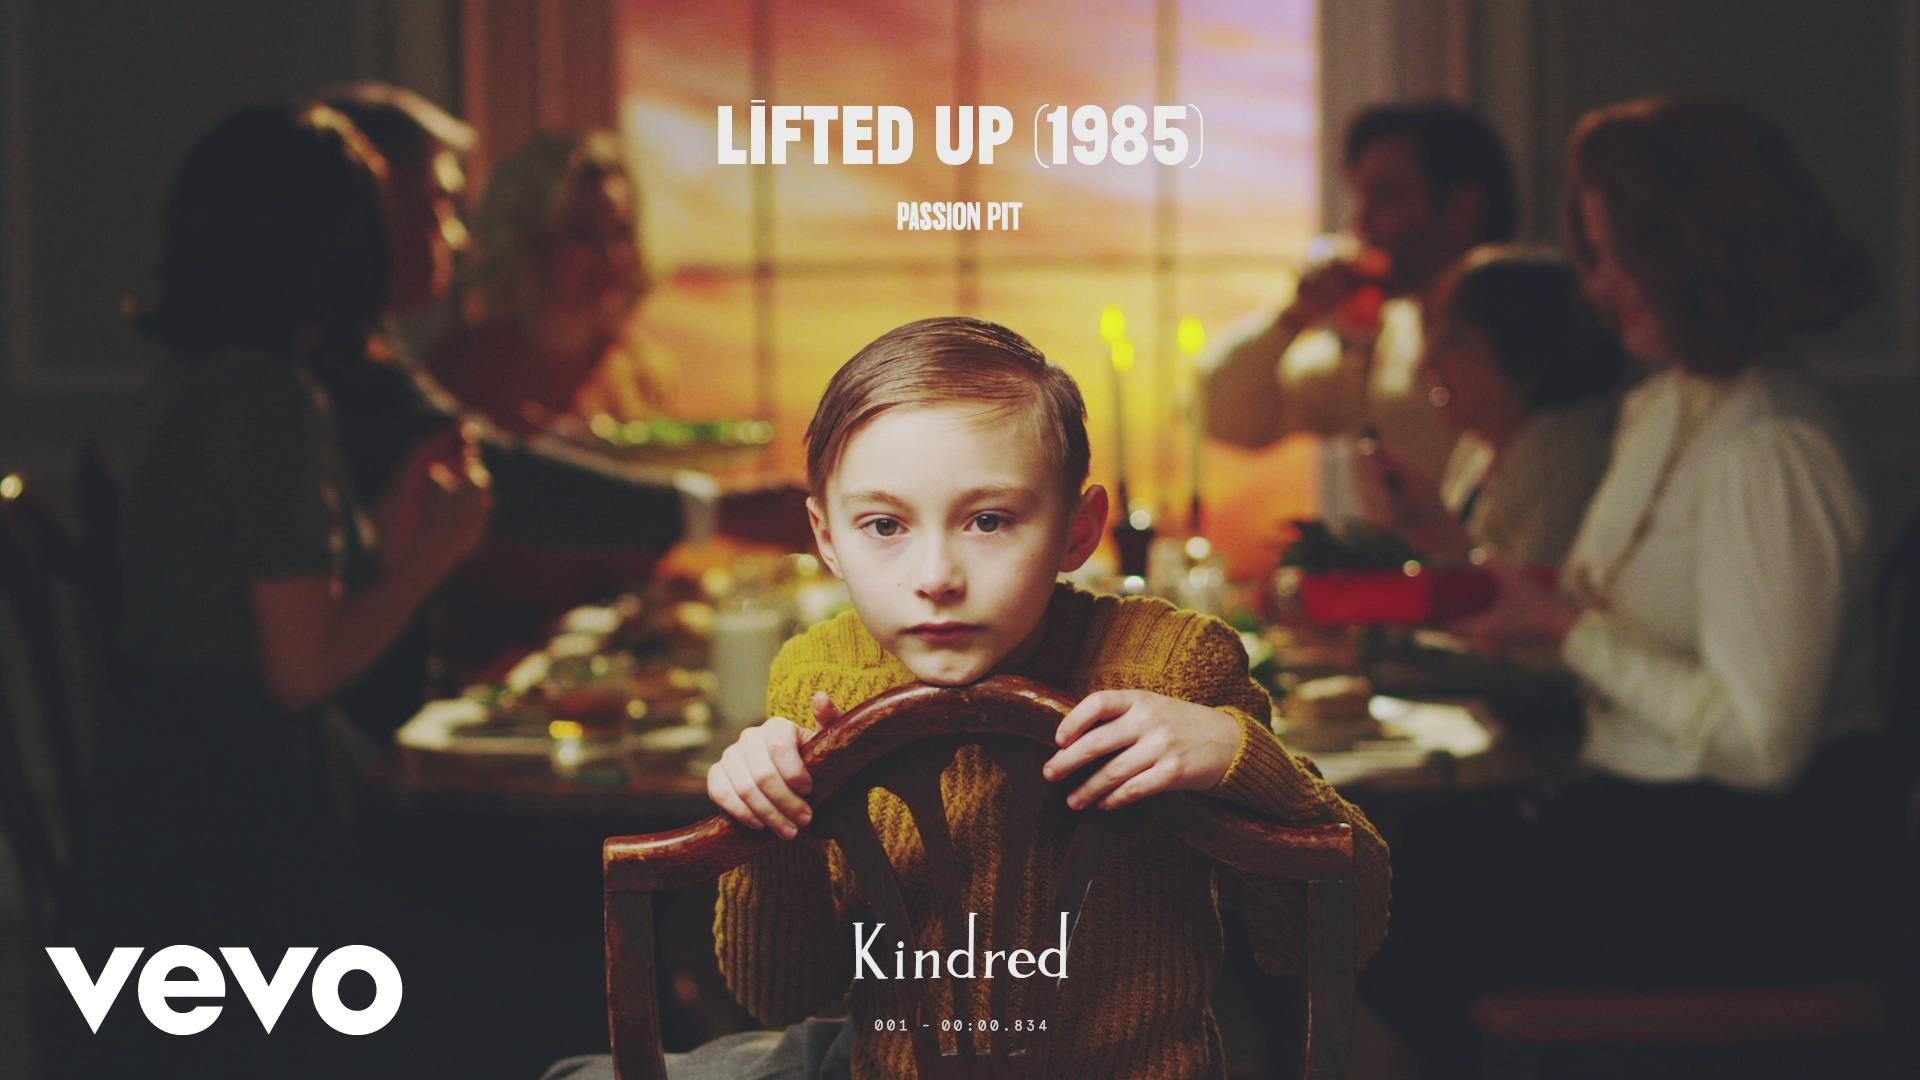 Passion Pit - Lifted Up